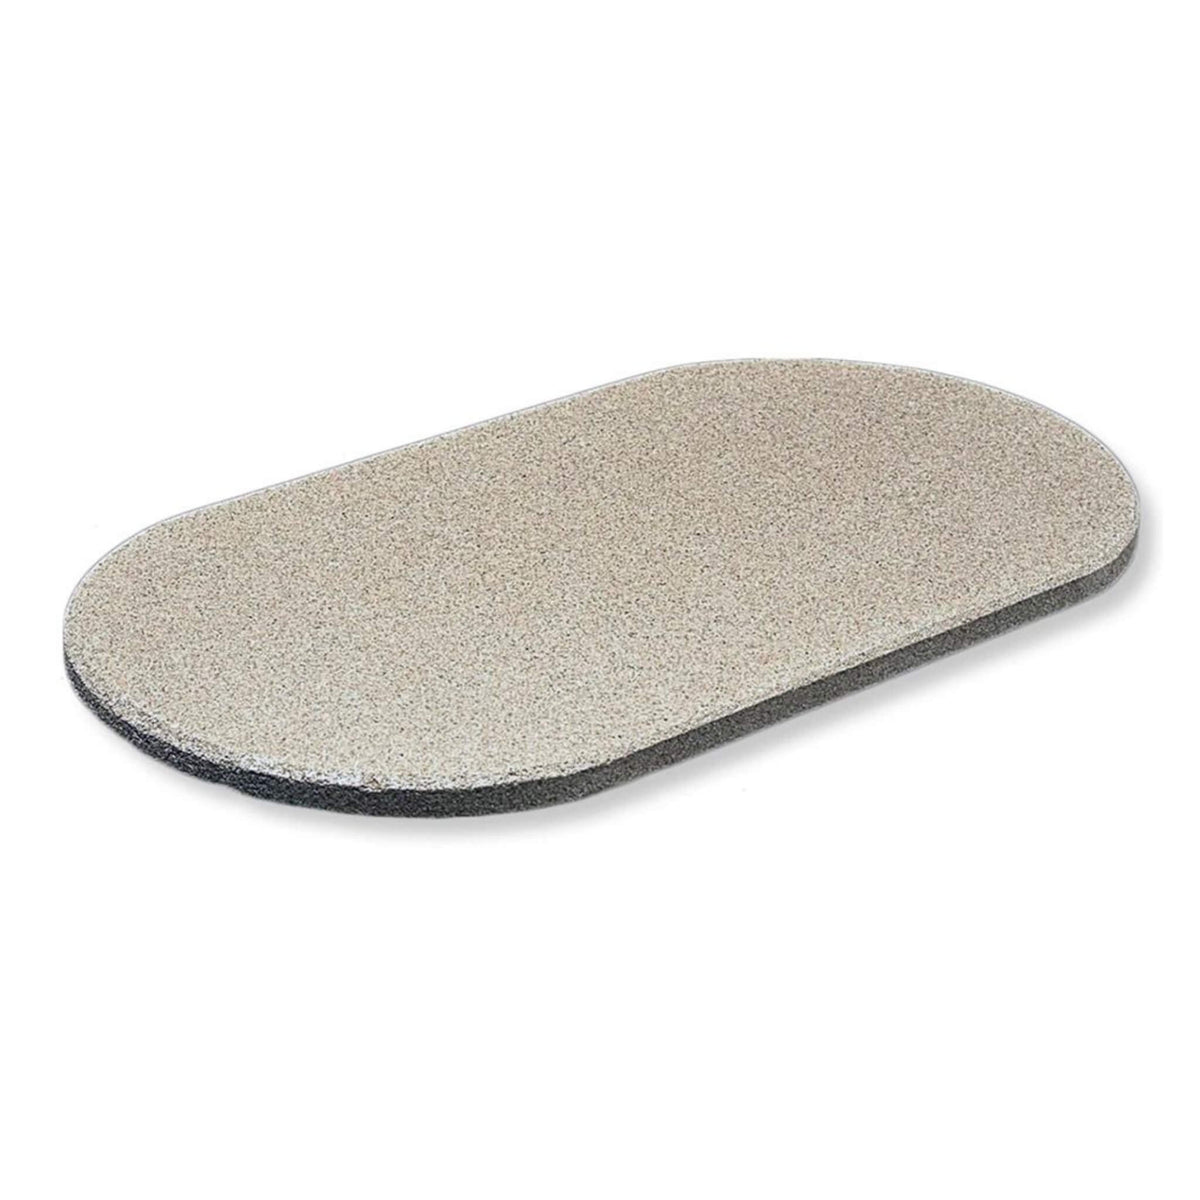 Primo Grill Fredstone Oval Baking Stone for Large Grills